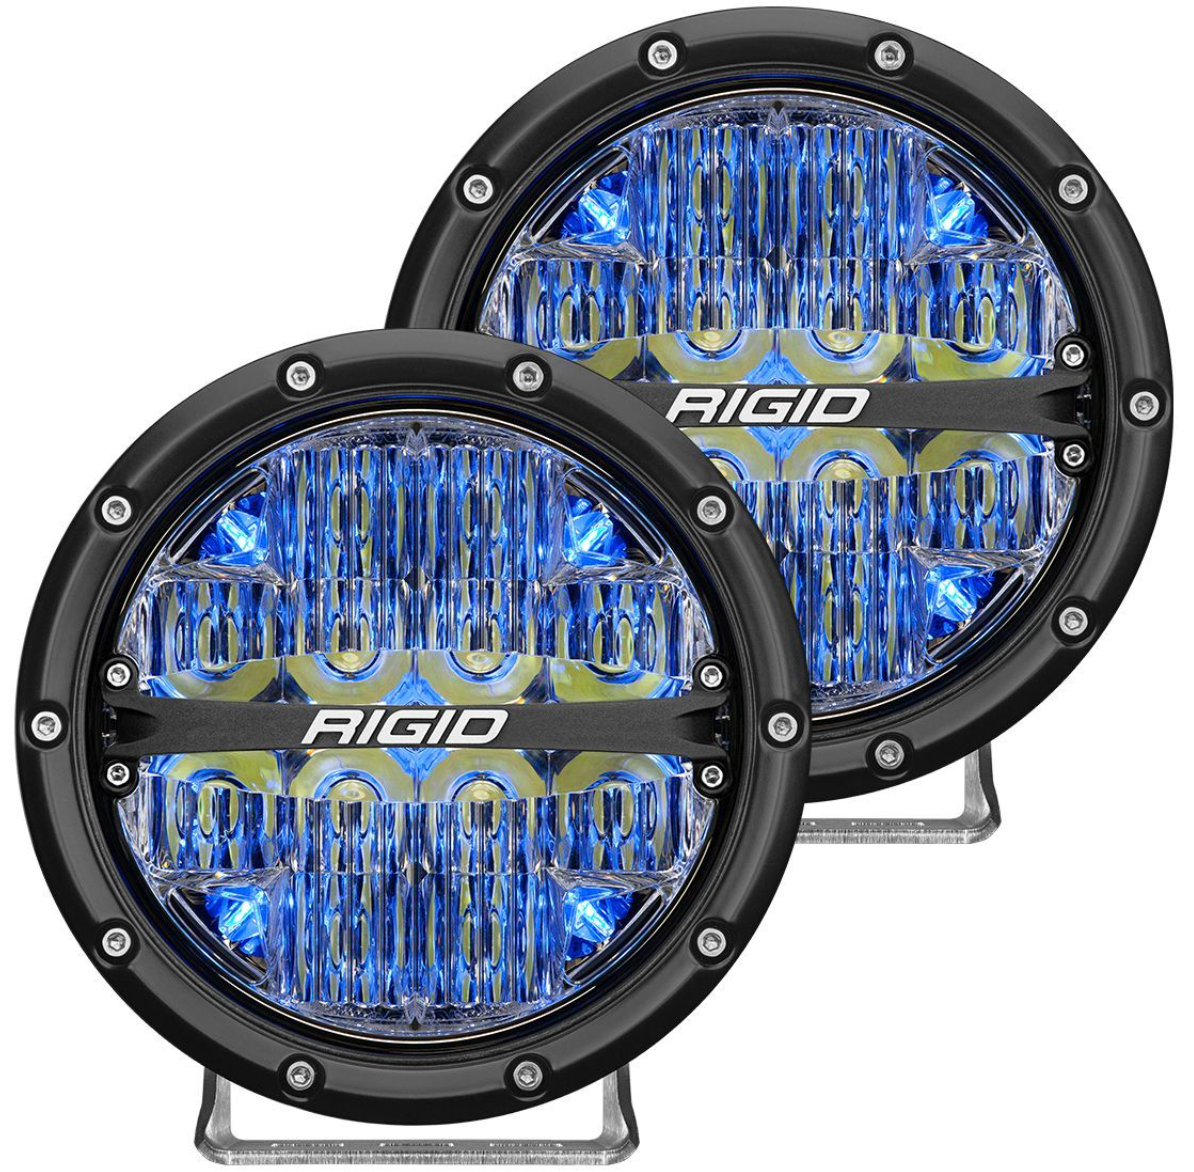 Rigid Industries 360-Series 6 Inch Led Off-Road Drive Beam White Red Blue Amber Backlight Pair